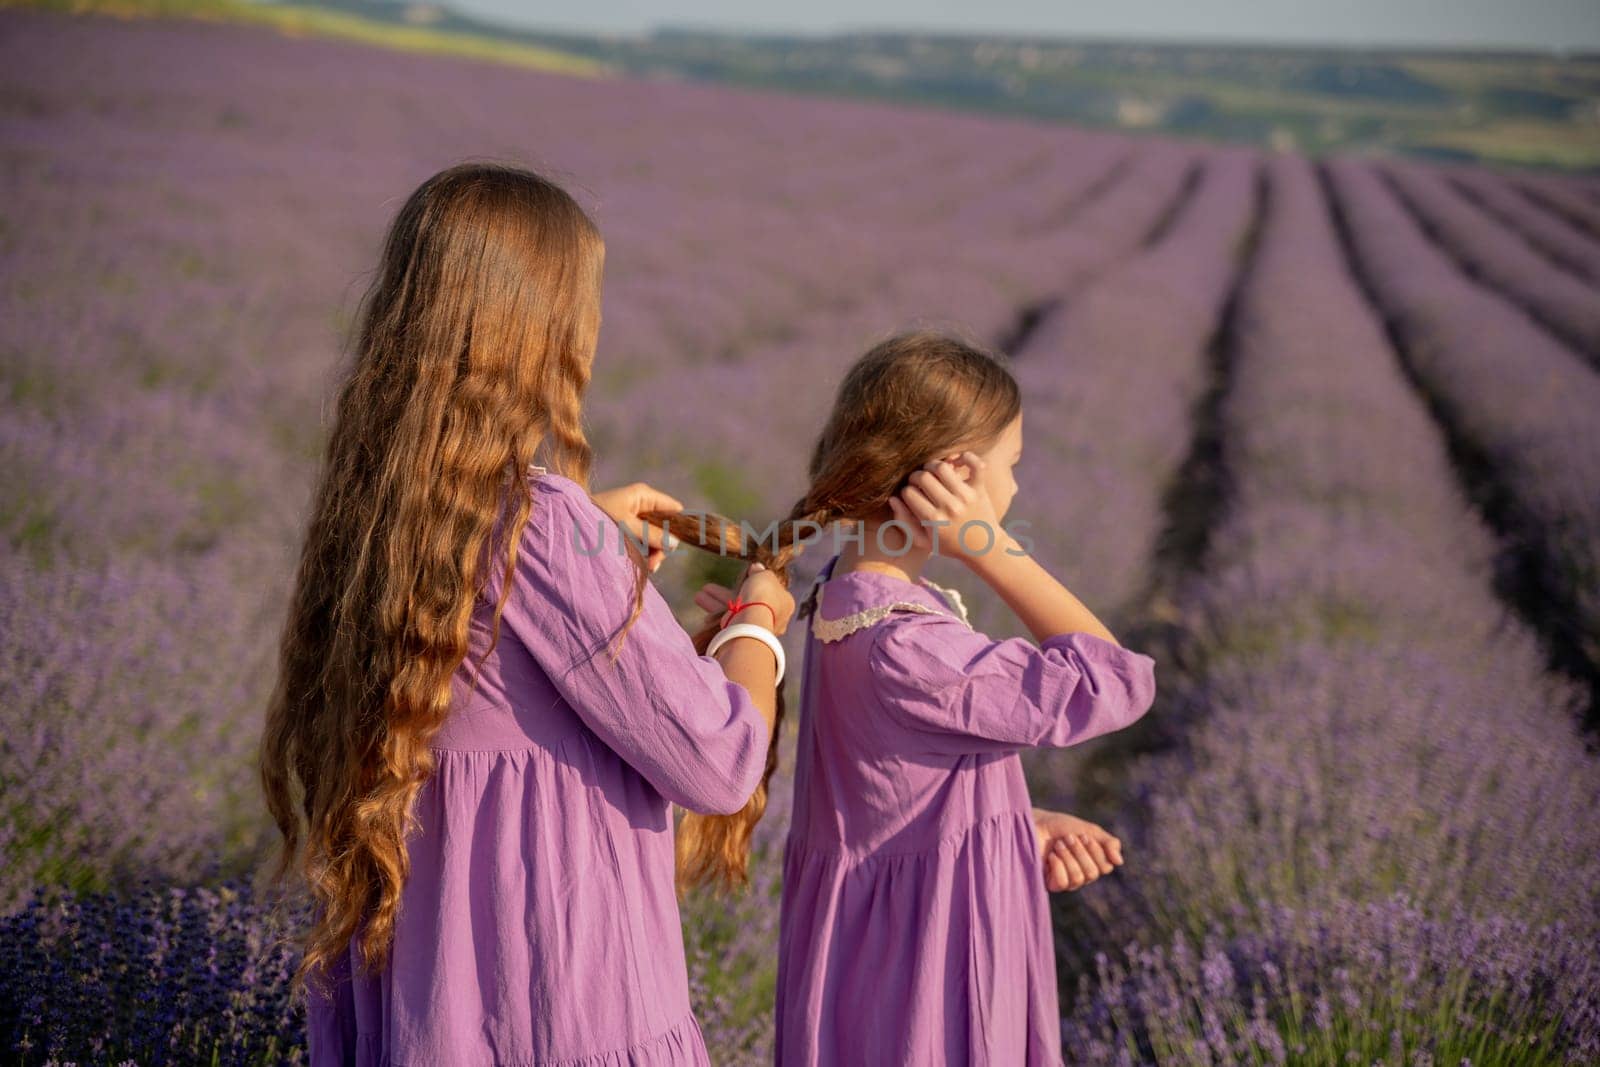 Mom and daughter braiding each other's hair in a field of lavender. The scene is peaceful and serene, with the girls enjoying each other's company and the beauty of their surroundings by Matiunina